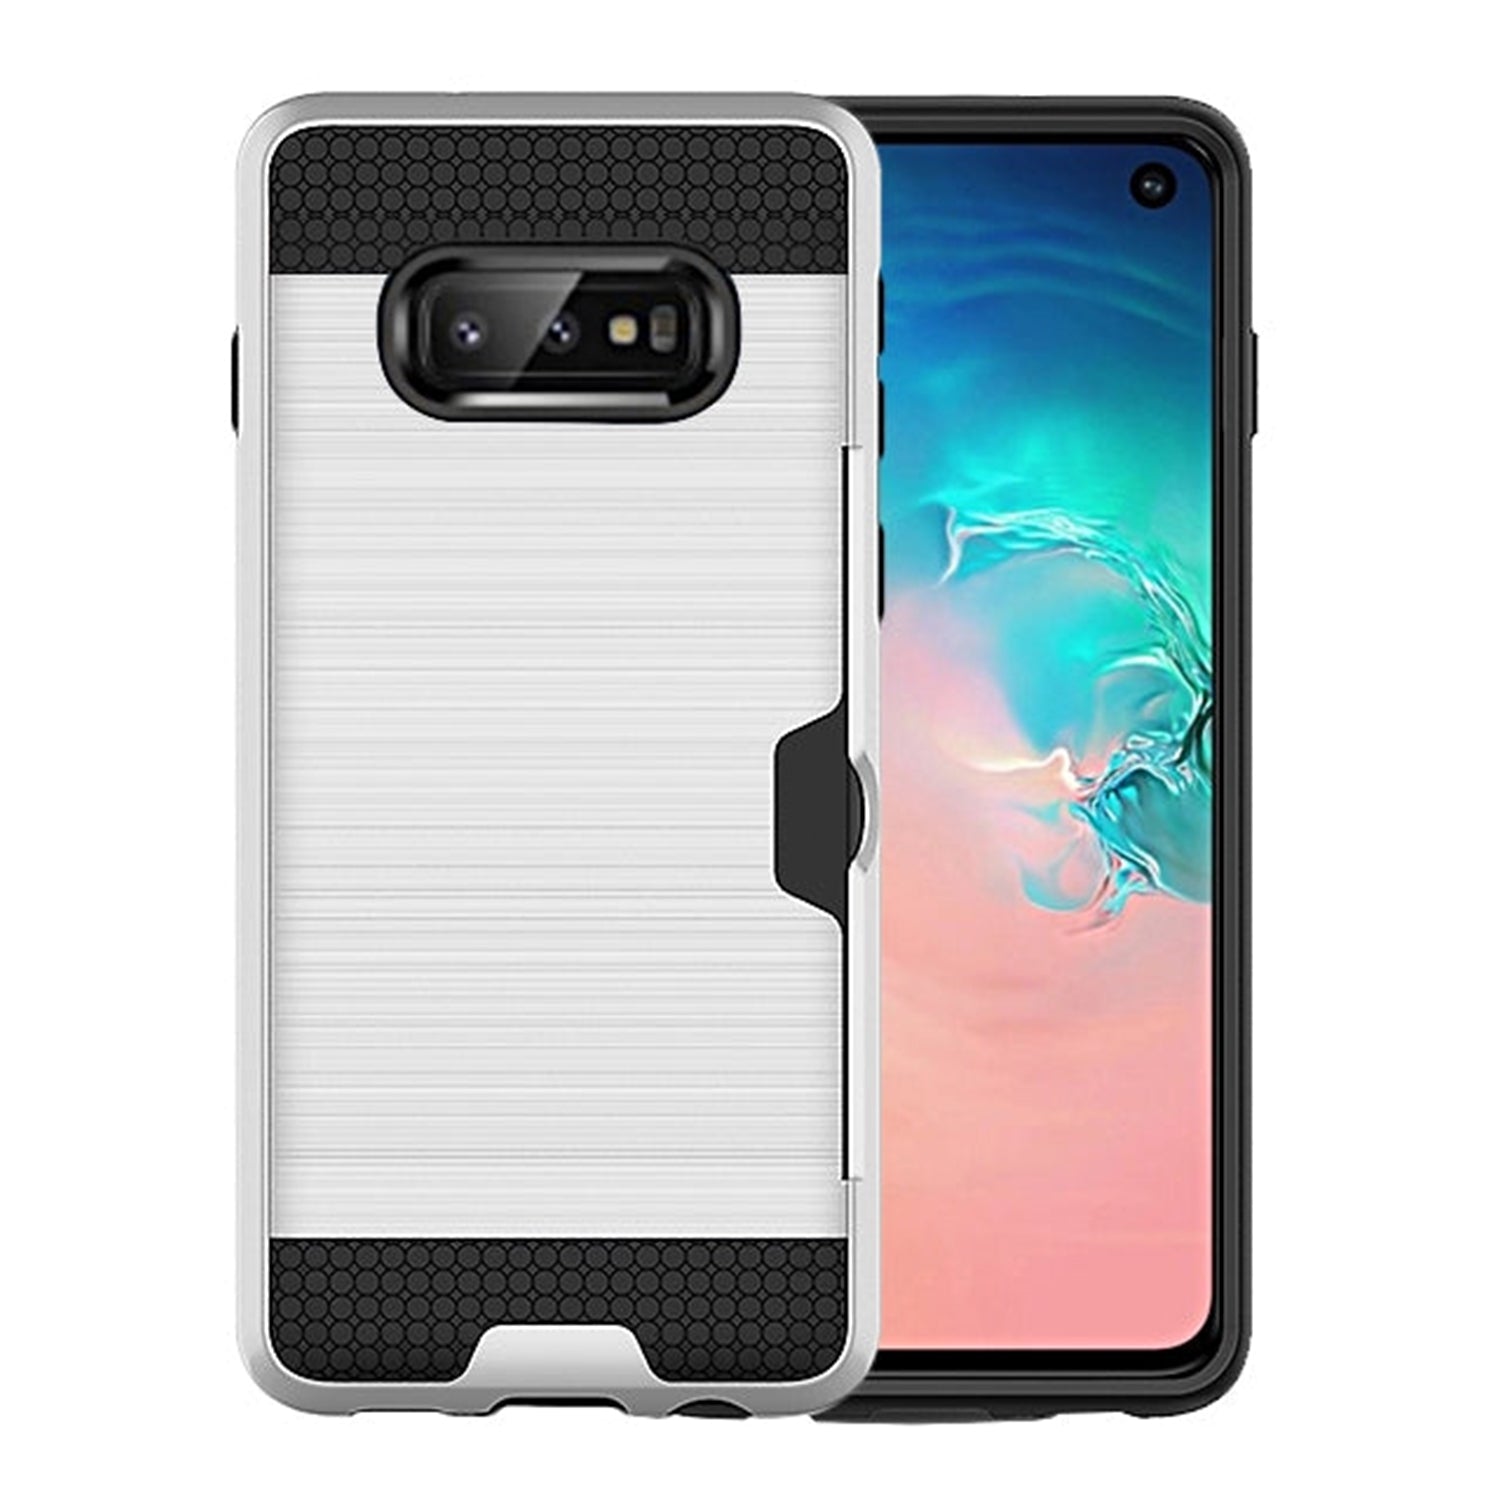 Slidable Card Holder Case for Galaxy S10e (5.8")